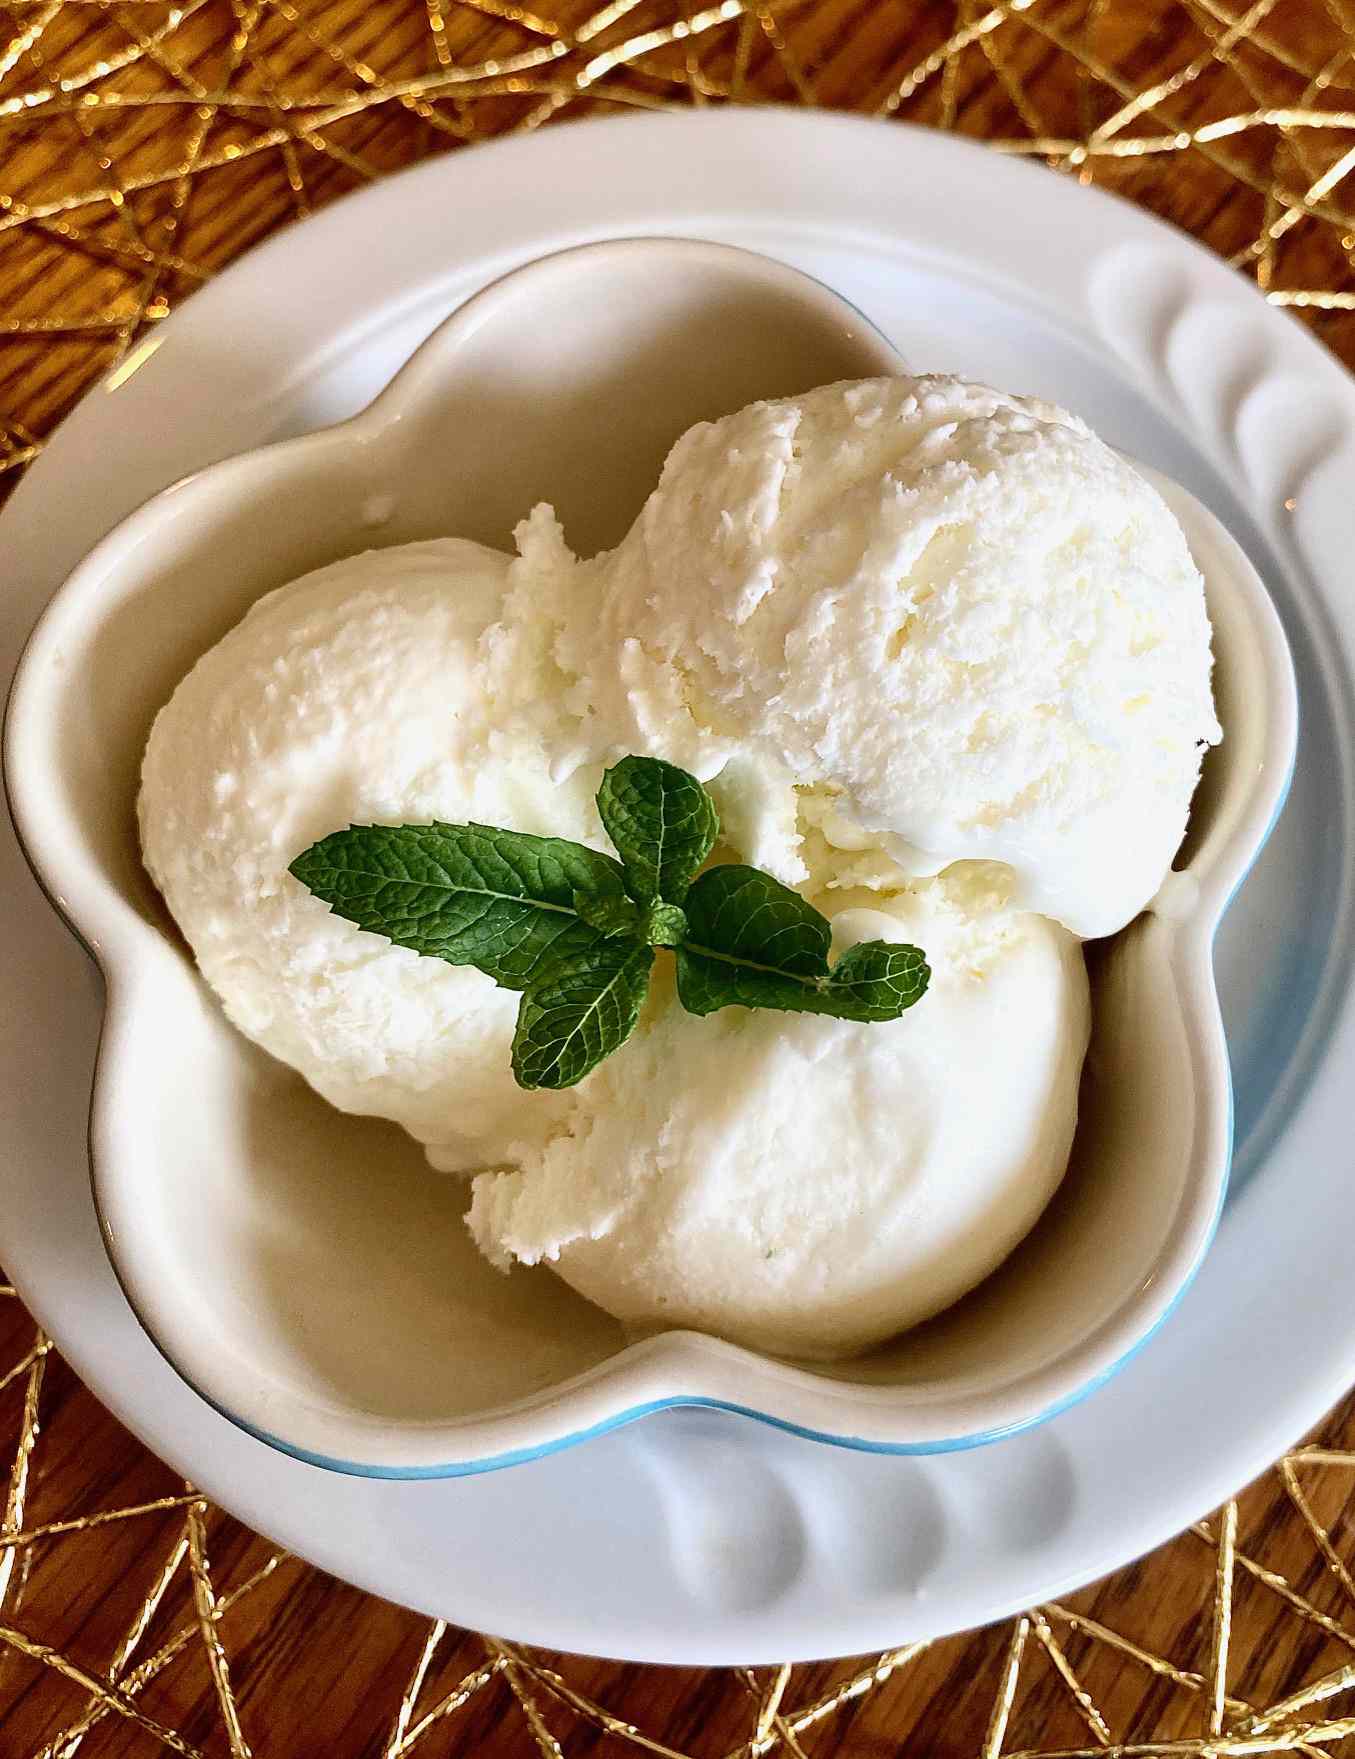 top-down view of three scoops of pale yellow ice cream garnished with fresh mint leaves